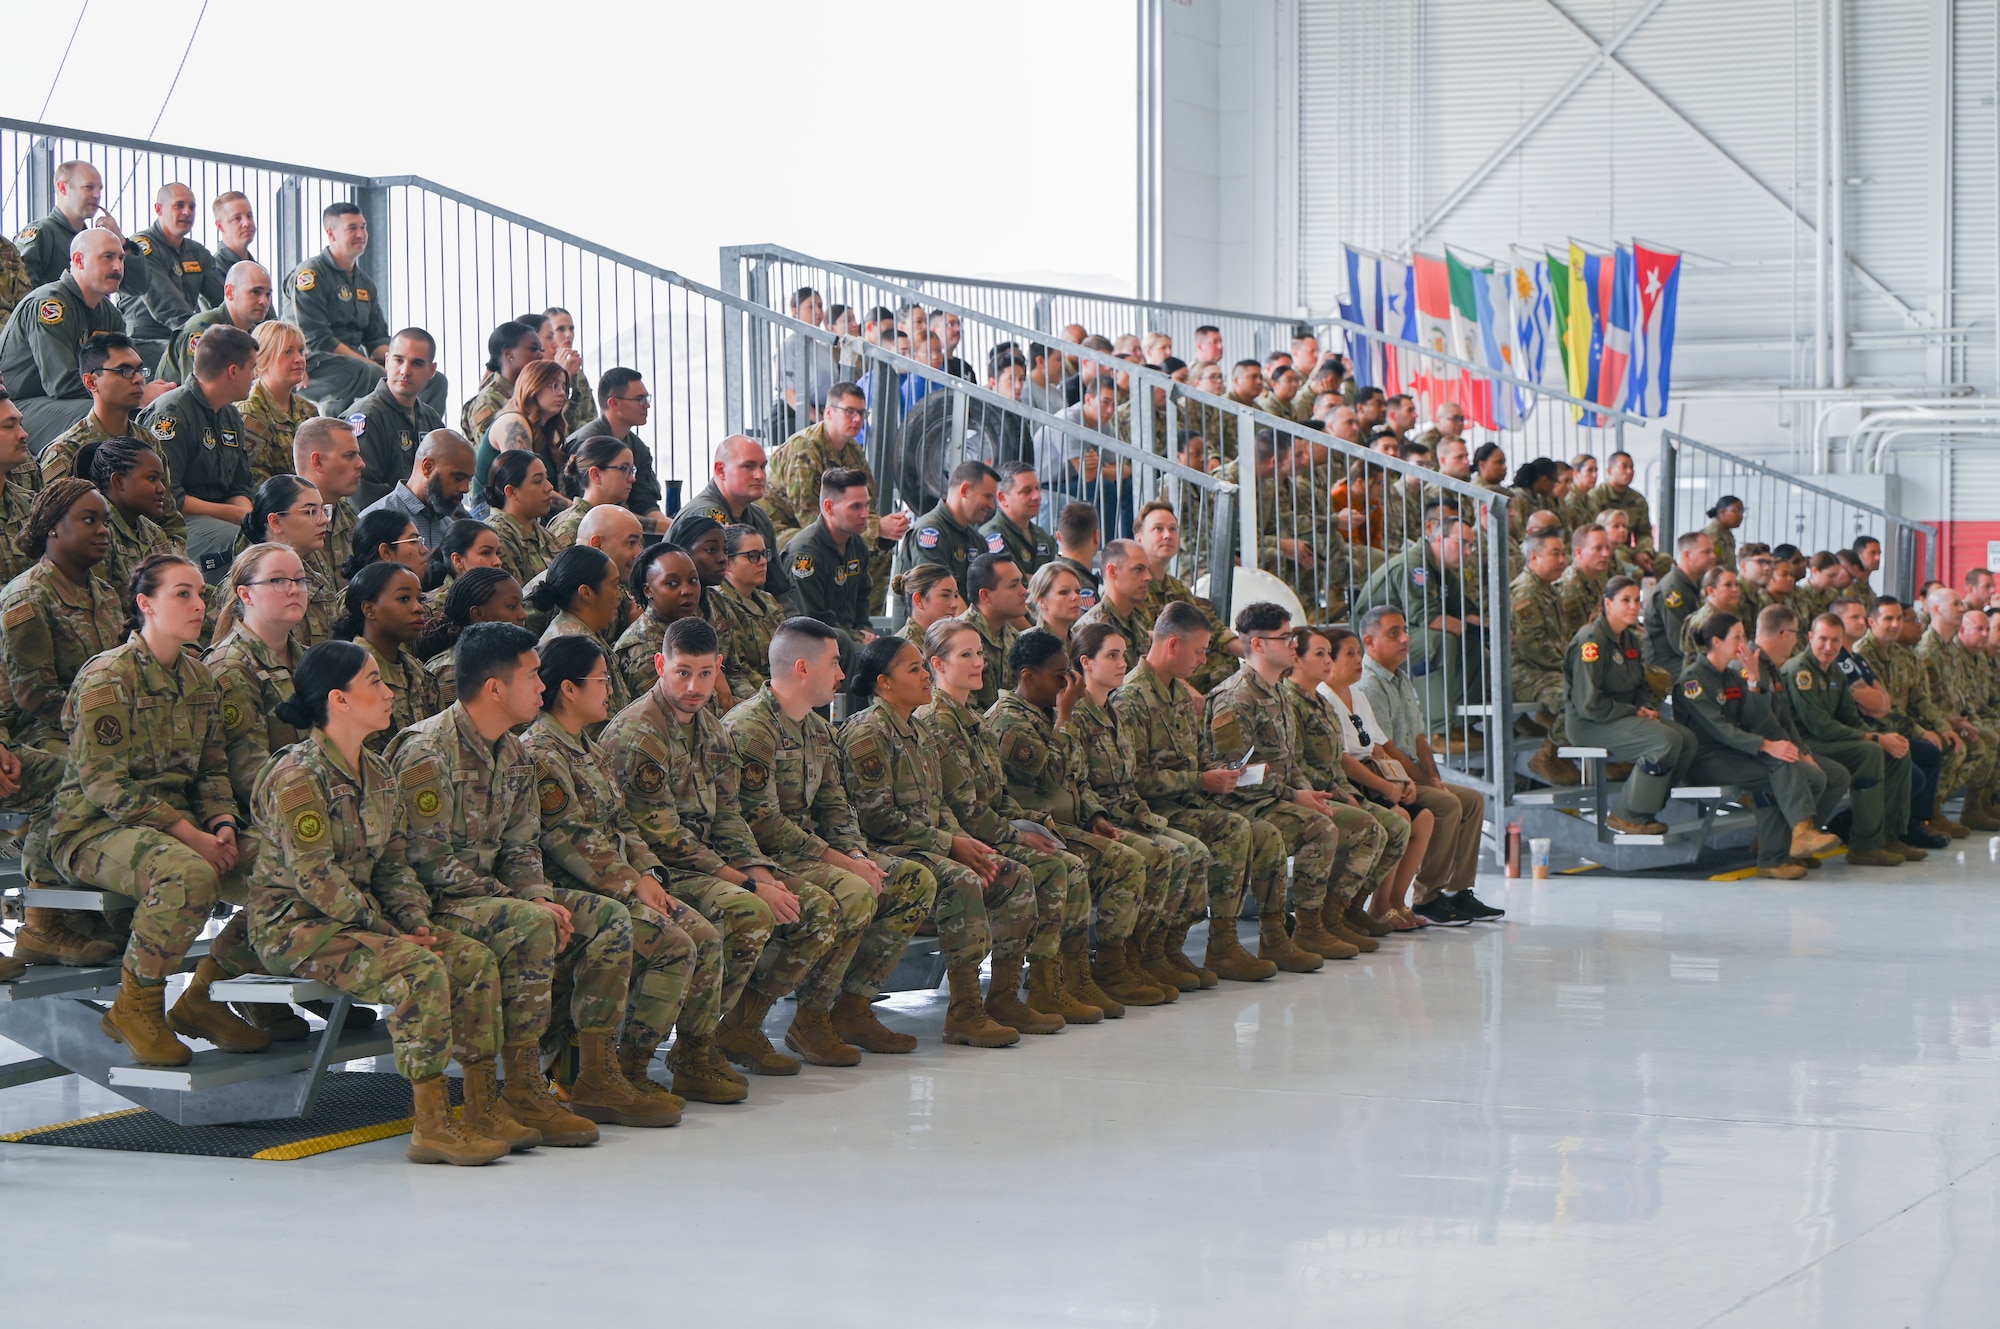 Airmen dressed in uniforms sit on two sets of bleachers waiting for the ceremony to begin